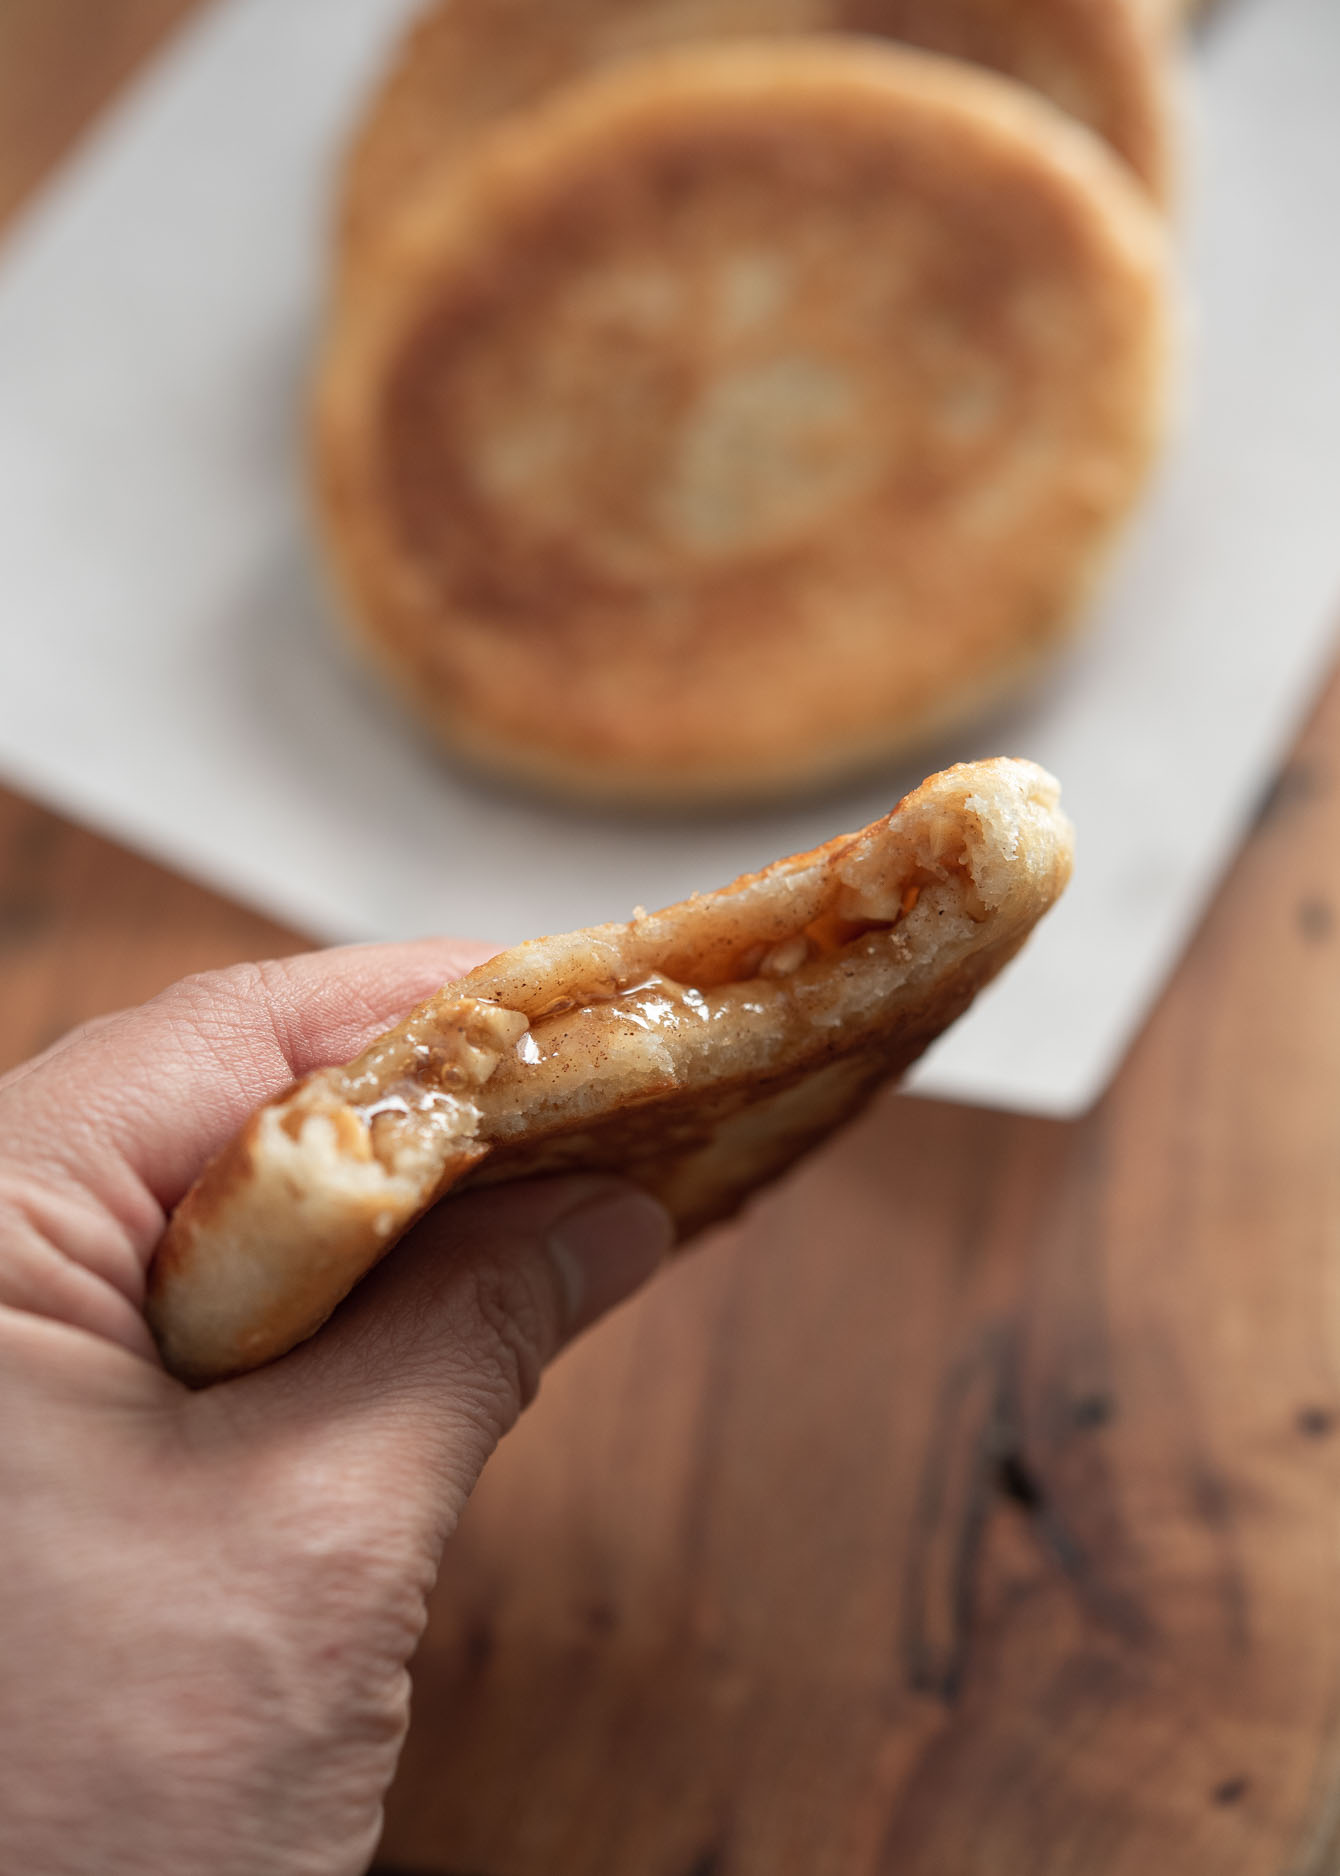 A hand holding a slice of Korean sweet rice pancake is showing hot brown sugar syrup inside.